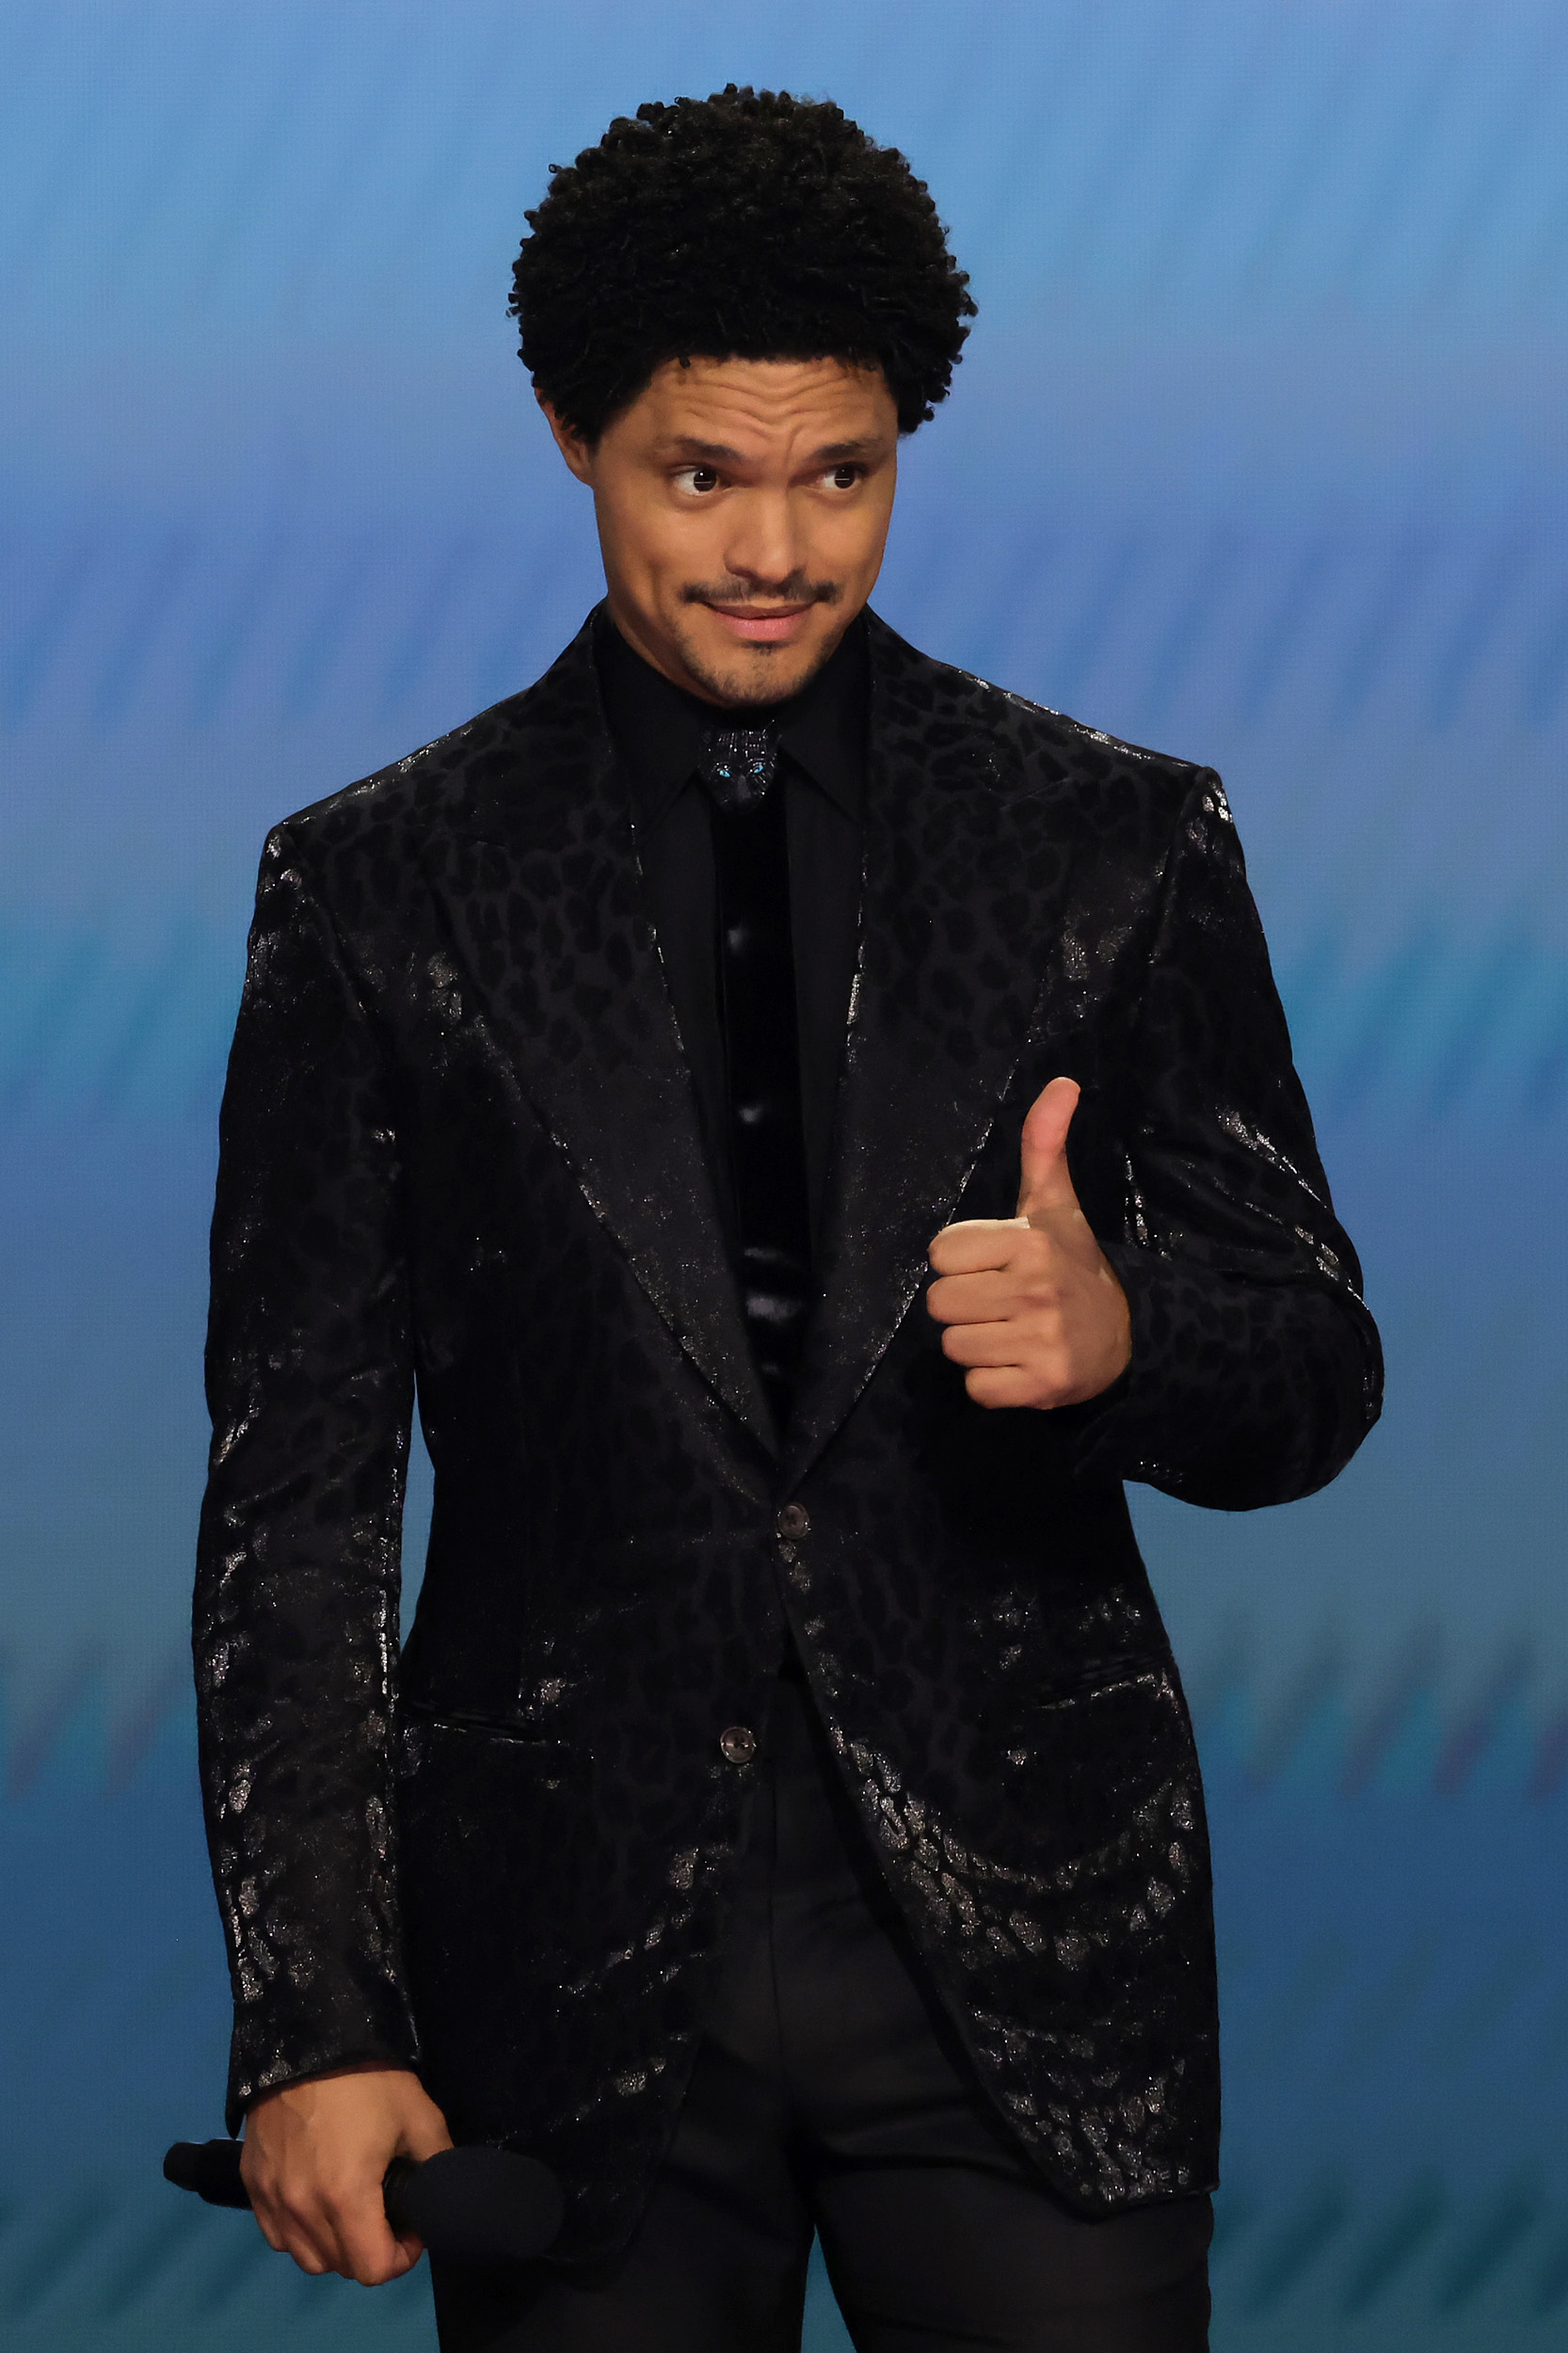 Trevor Noah in a textured blazer giving a thumbs-up onstage